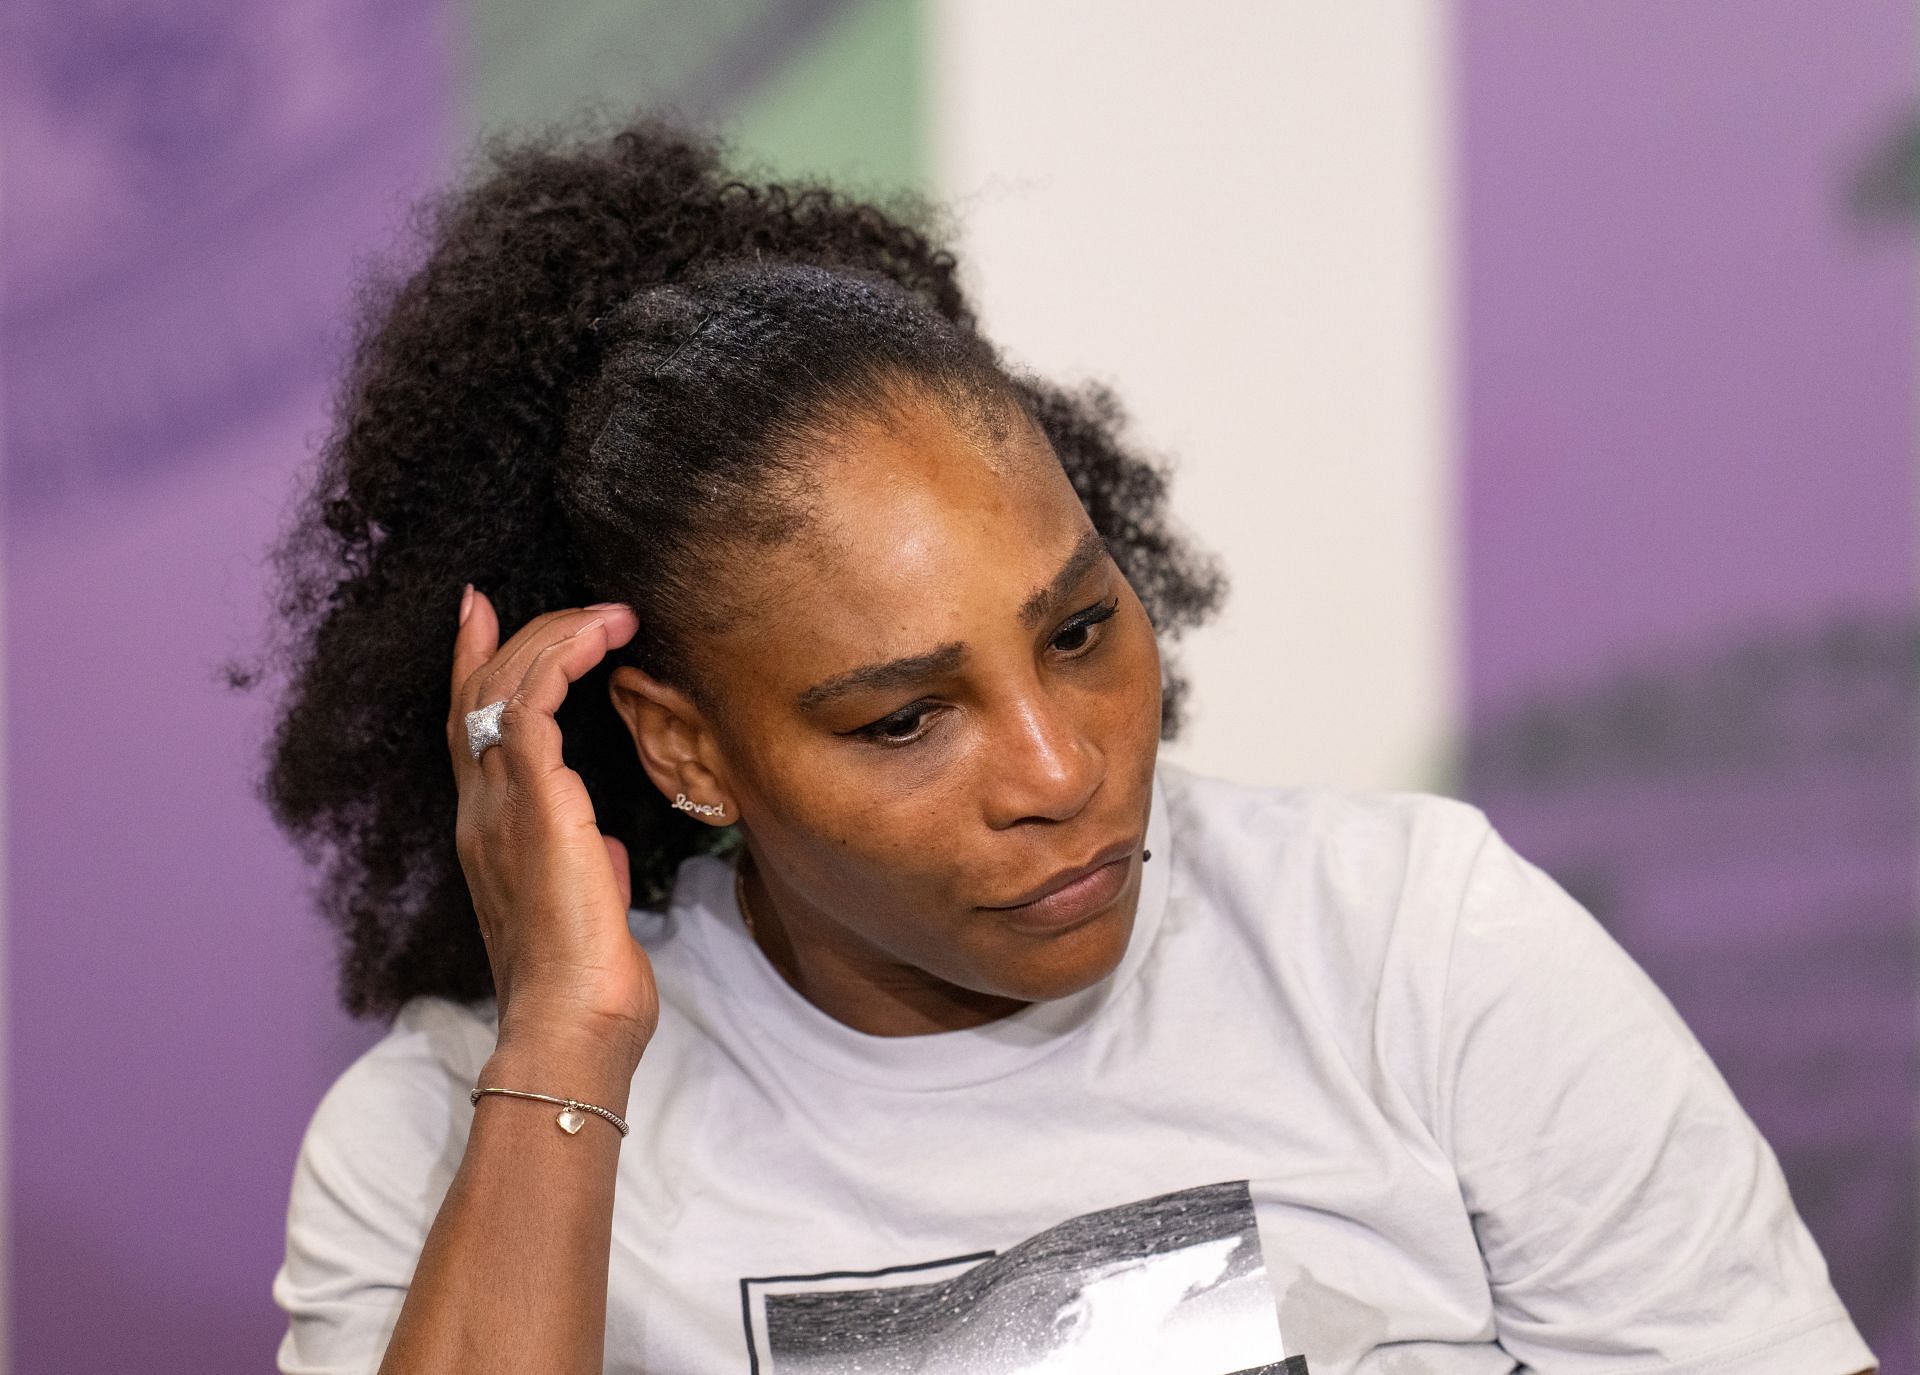 Serena Williams looks distraught following her opening-round defeat at Wimbledon 2022